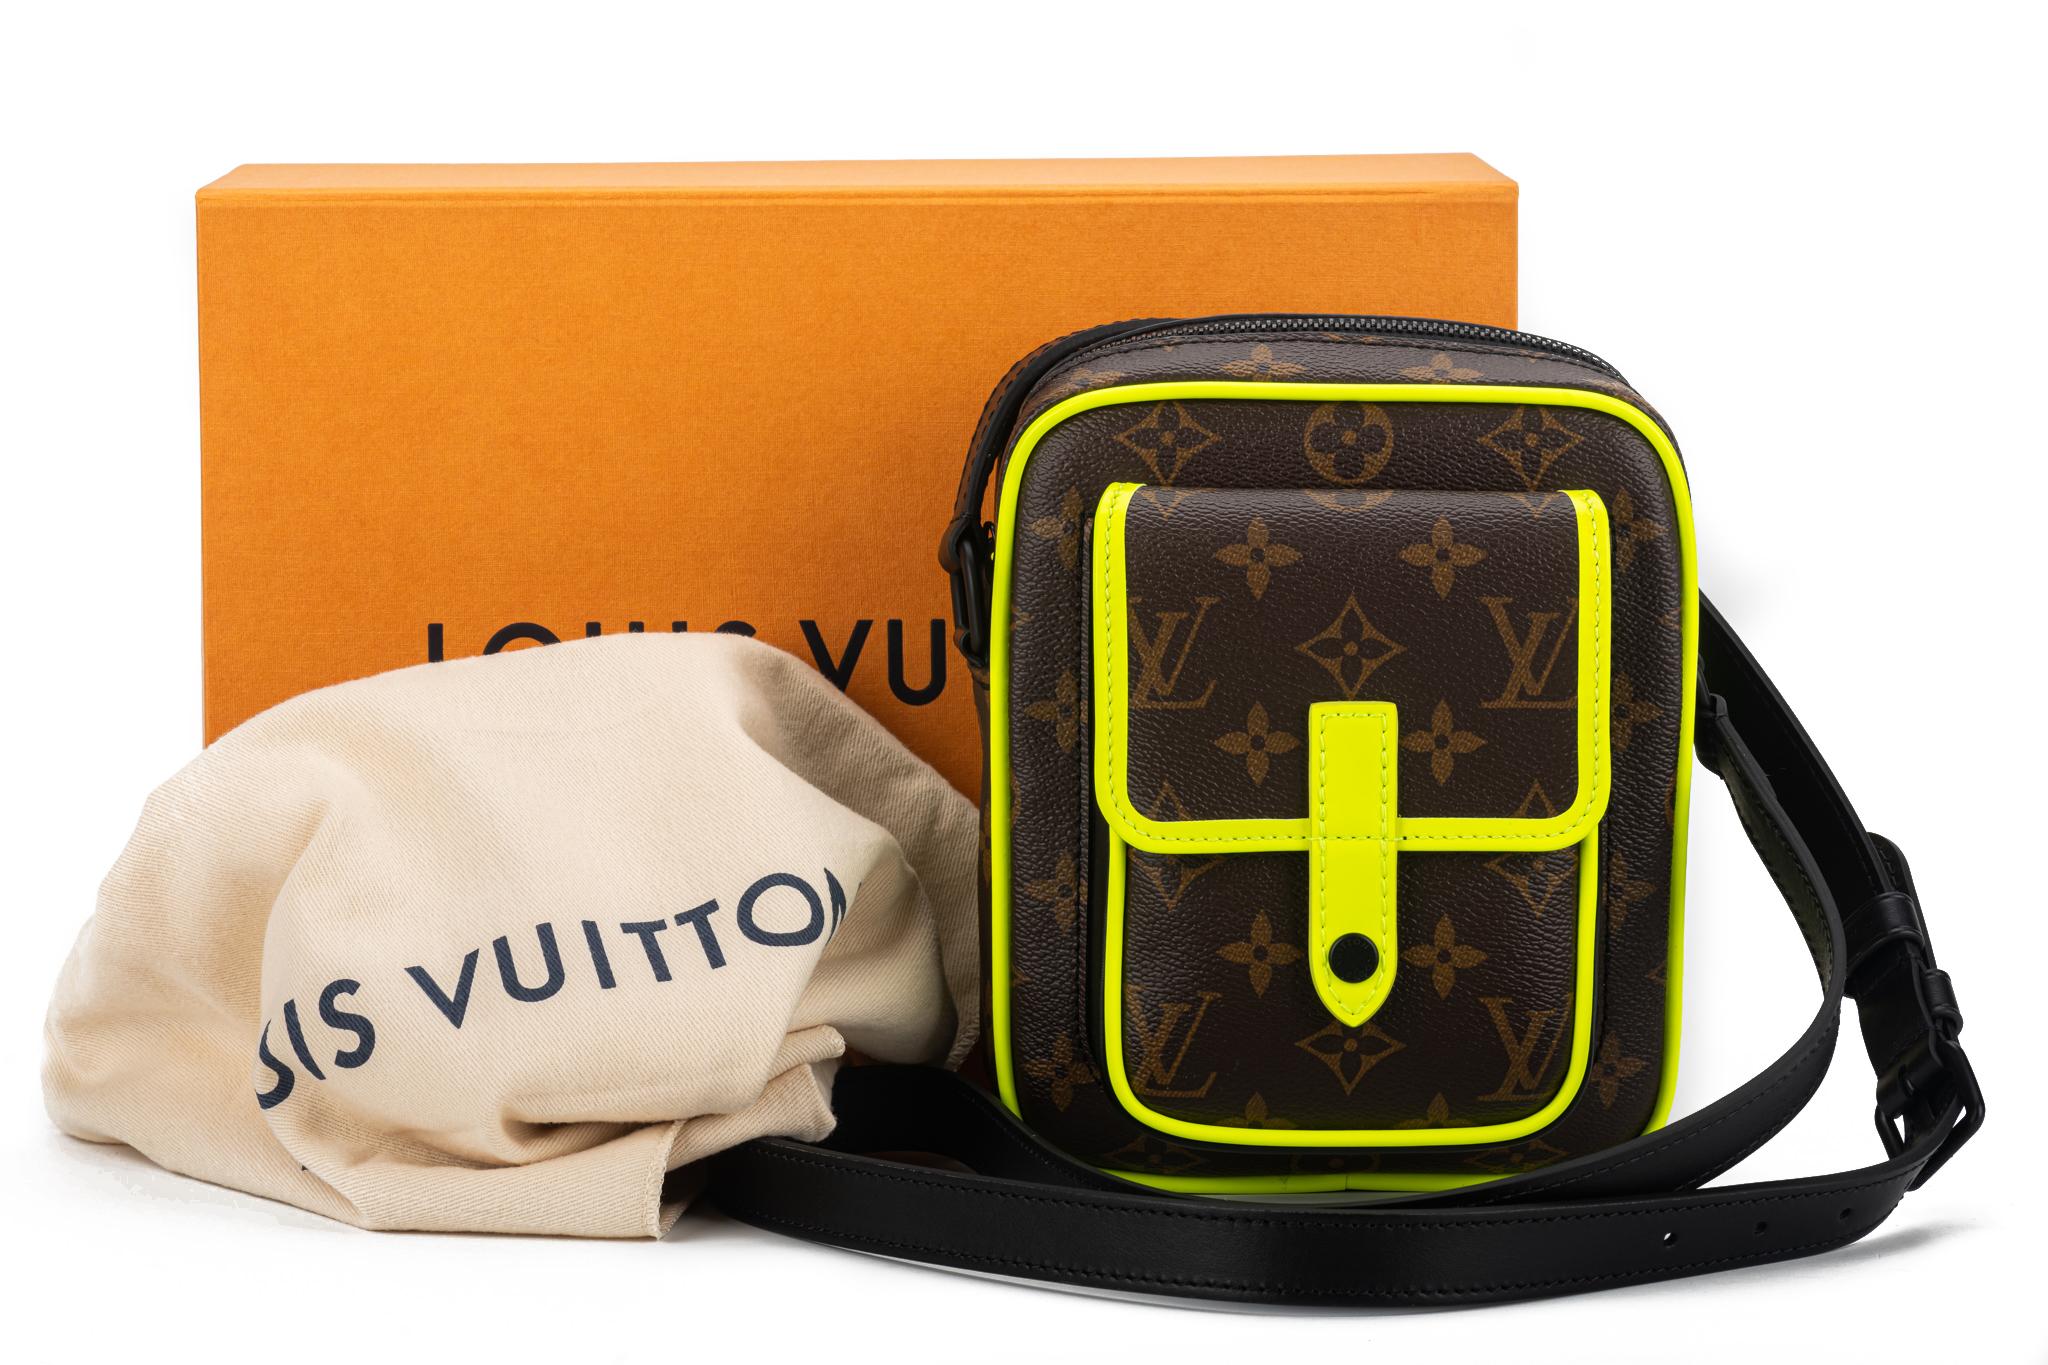 Louis Vuitton limited edition Maccassar Christopher cross body bag. Classic brown monogram coated canvas with fluorescent yellow and black trim. The shoulder strap measures 20” and it is adjustable. Inside there is a compartment for credit cards.